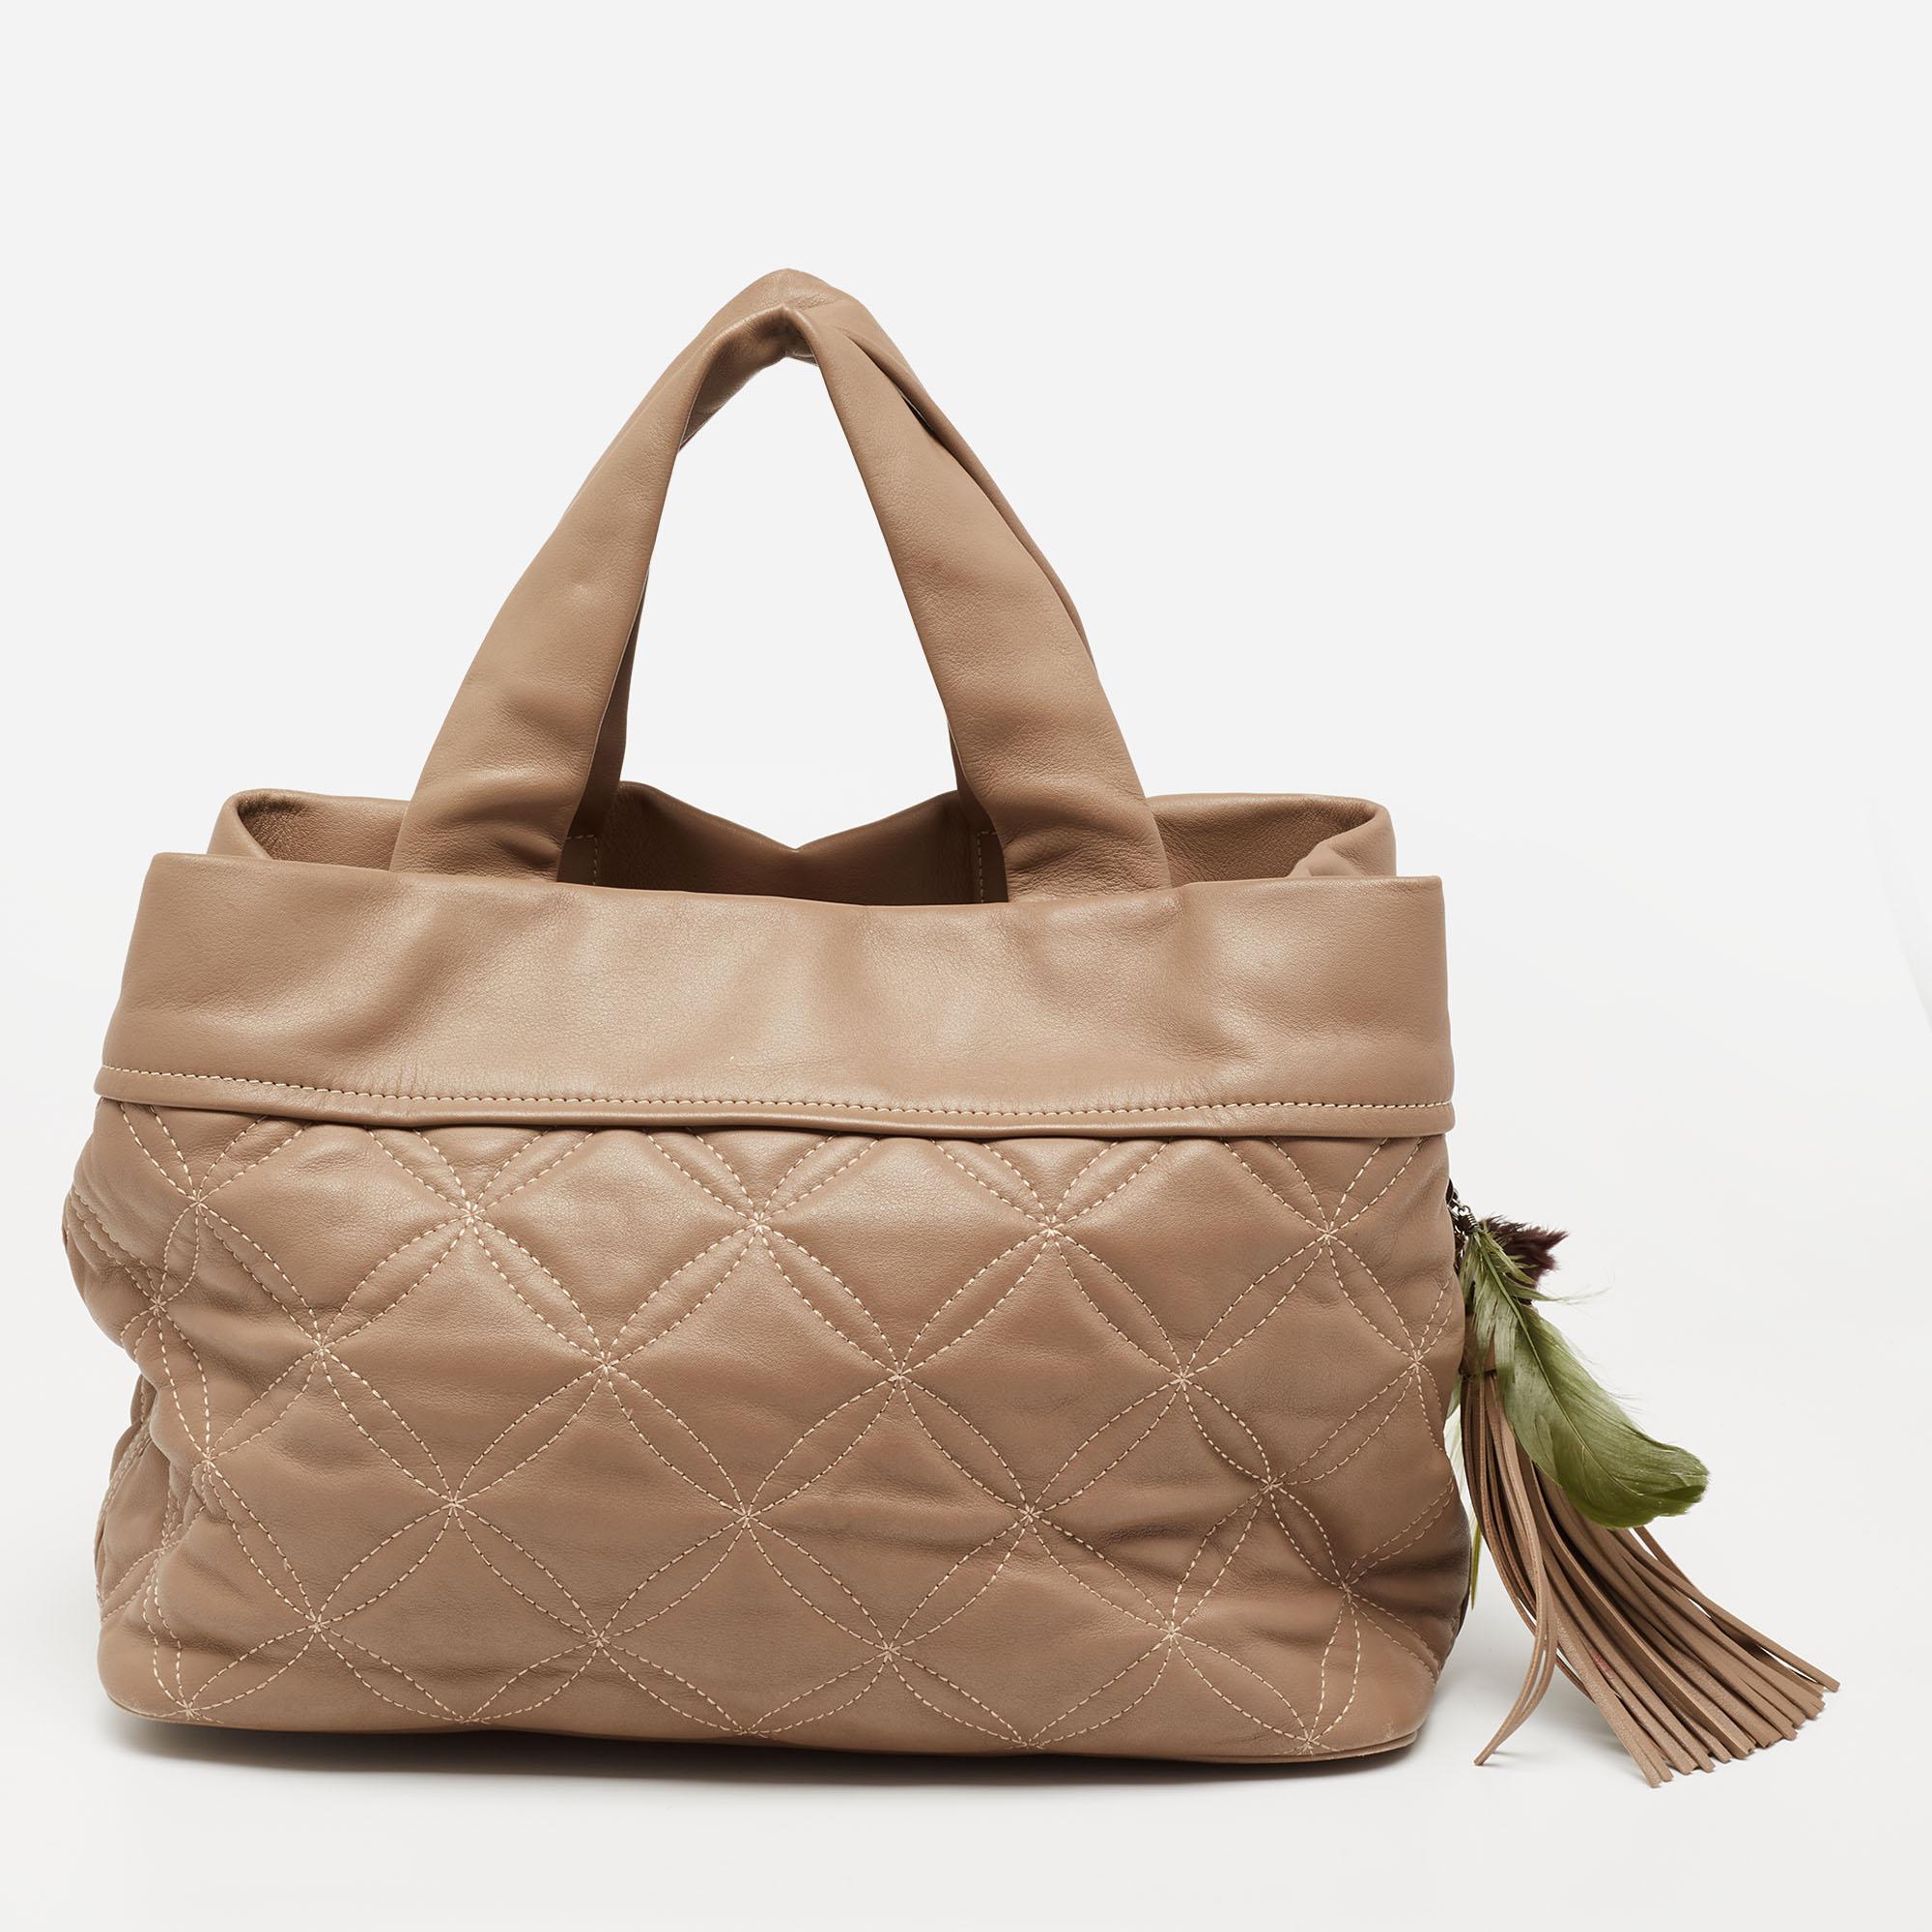 This tote from the house of MCM features a classic shape making it ideal for professional settings. It has been crafted from beige leather and fitted with two top handles, a front logo, and an interior to easily hold all your day-to-day essentials